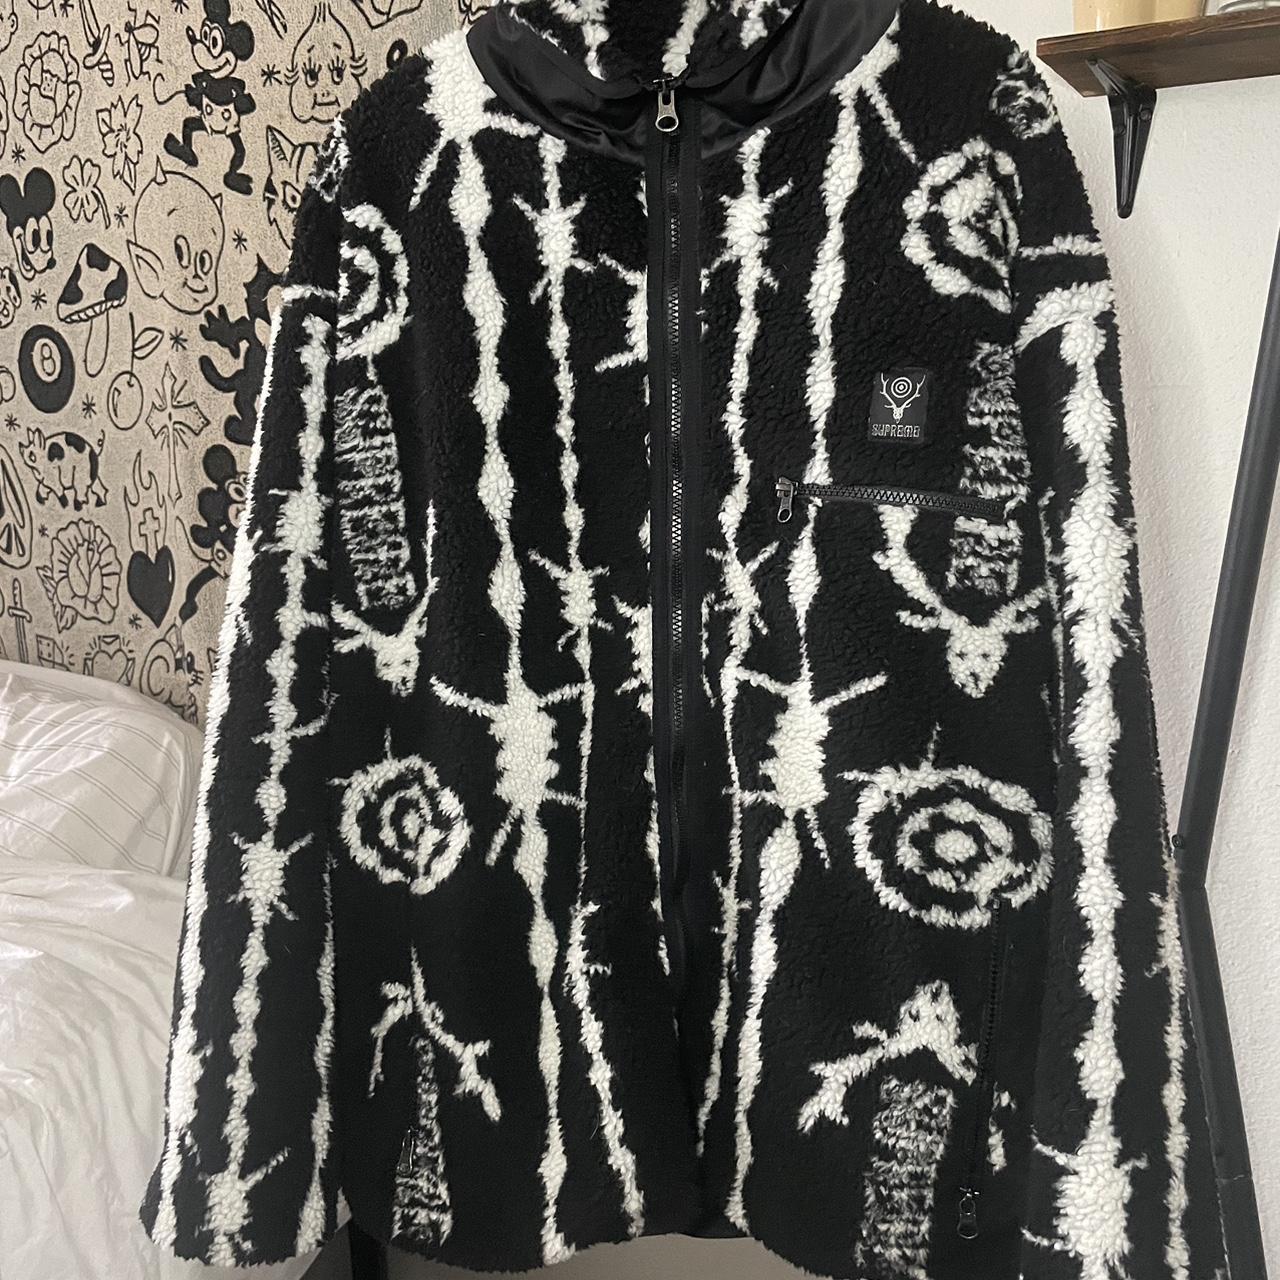 XL South2 West8 × Supreme barbed wire fleece jacket...